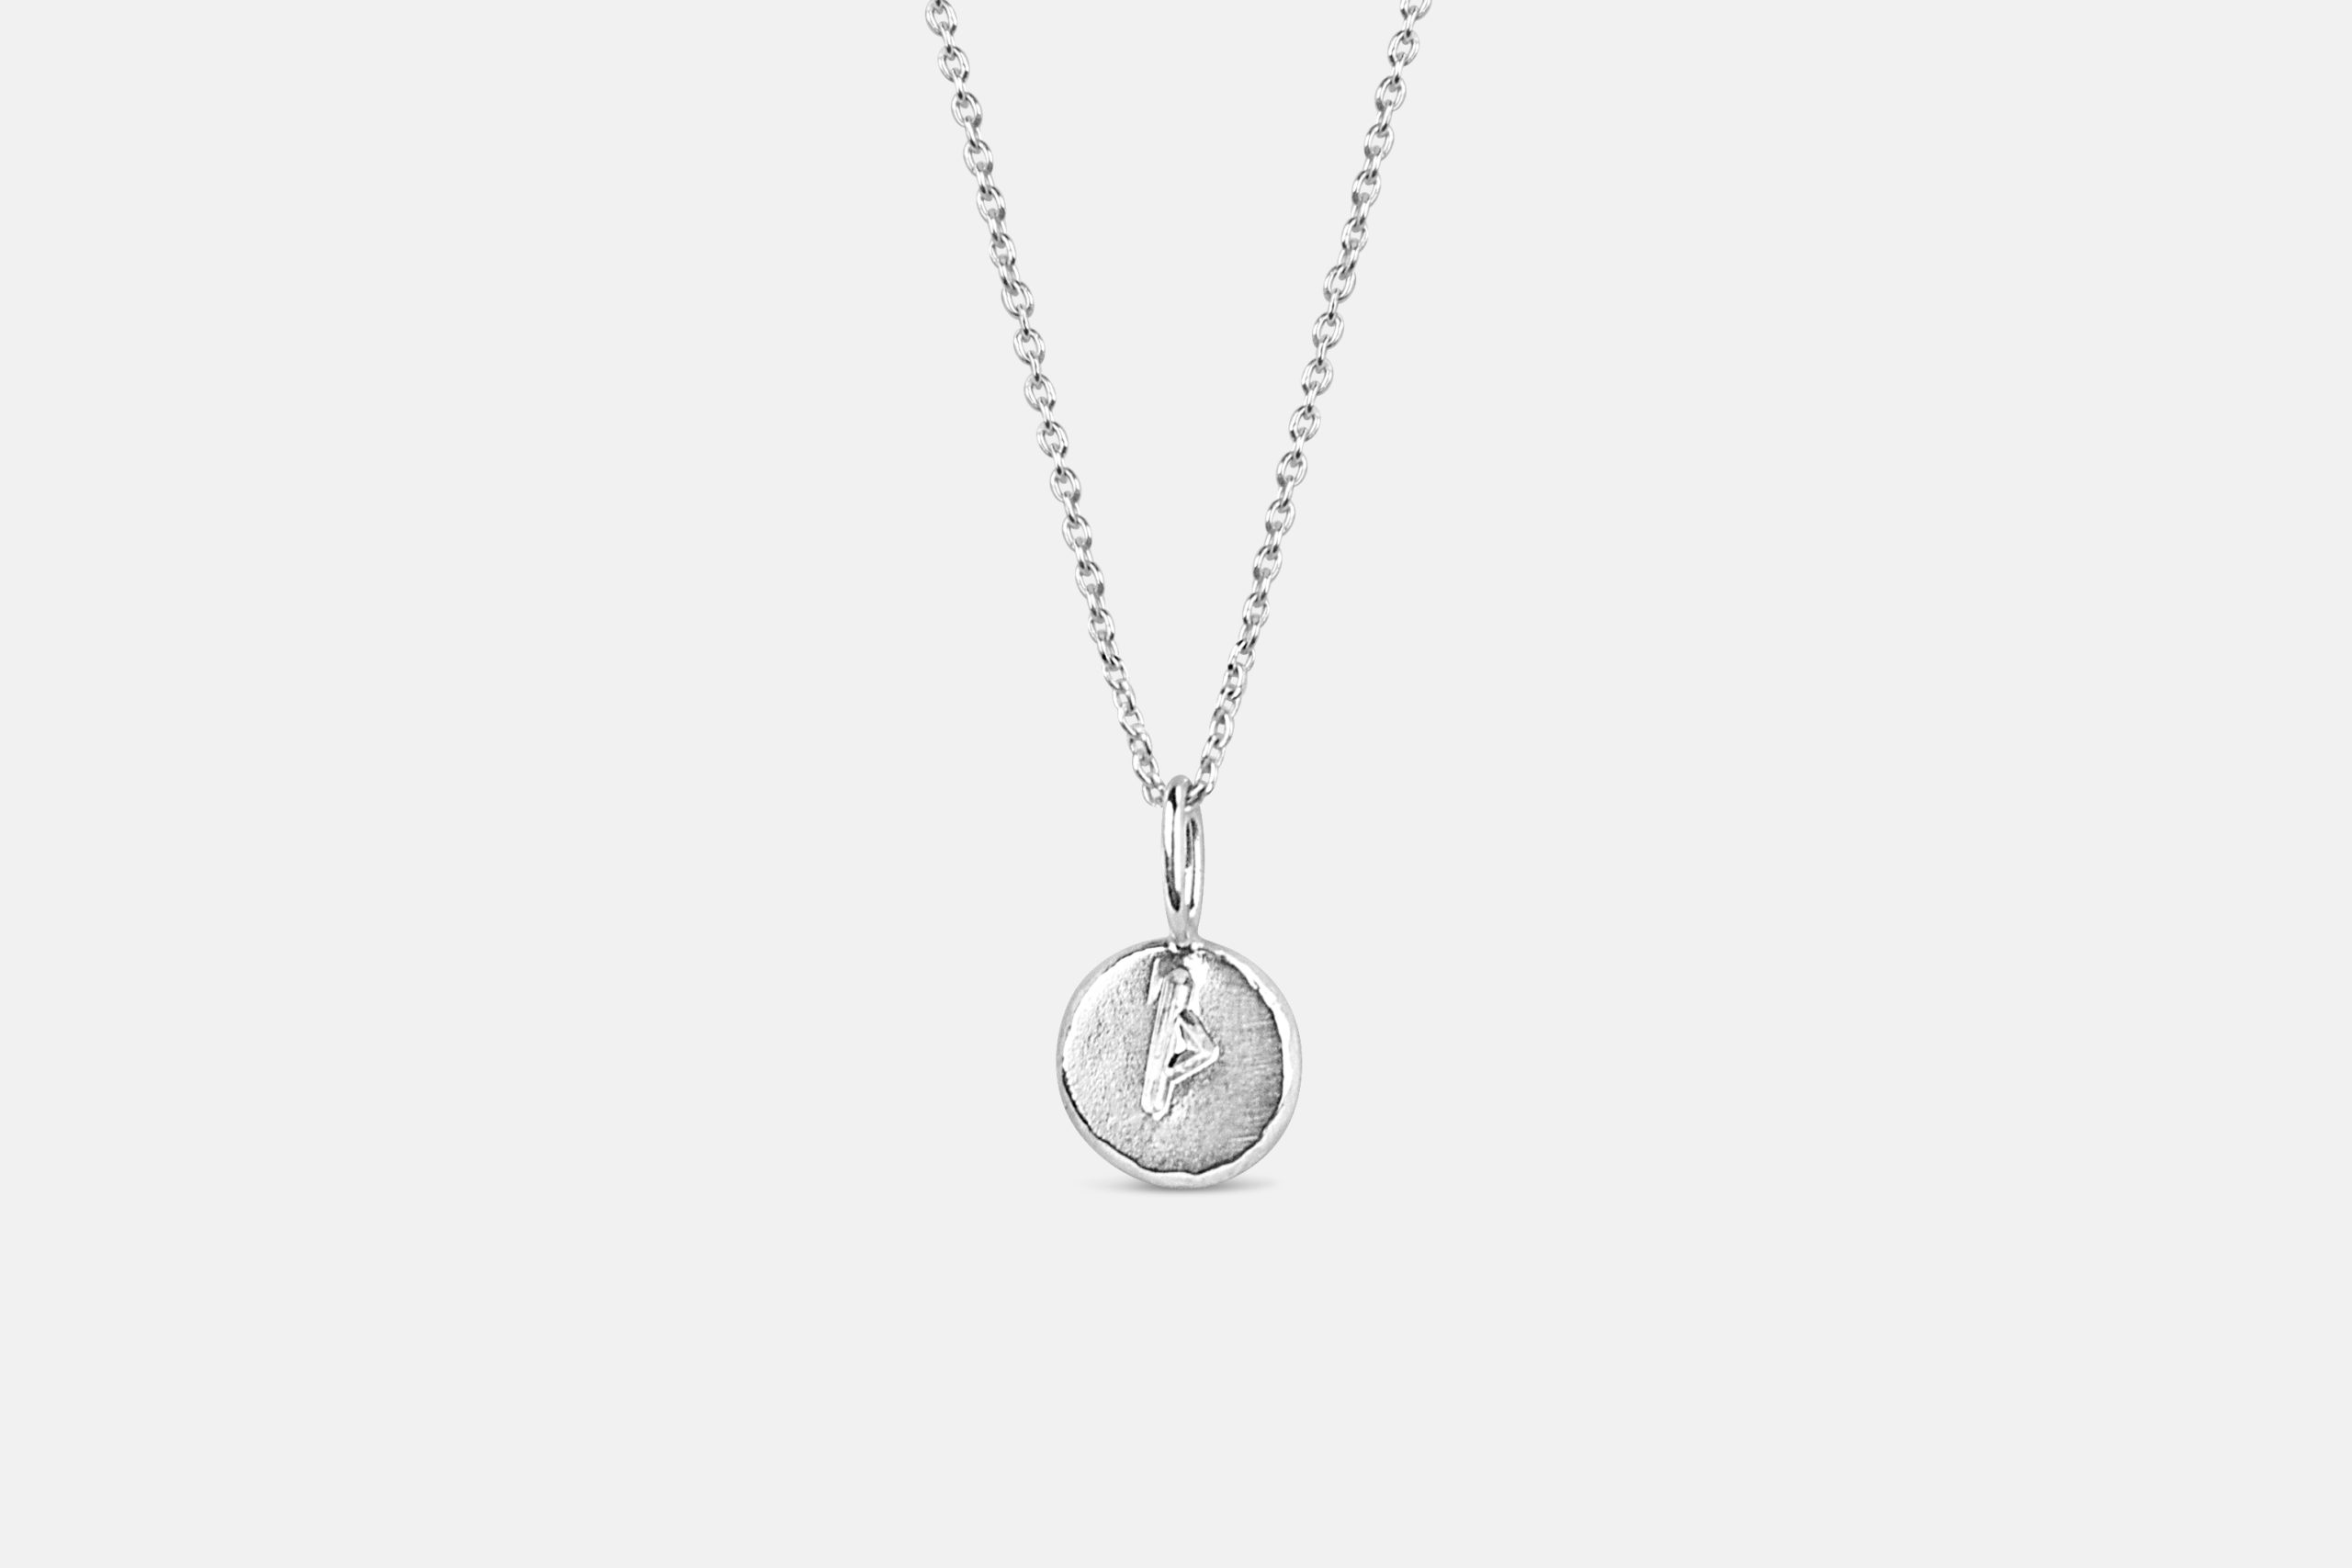 Protection defence charm necklace sterling silver thurisaz futhark rune